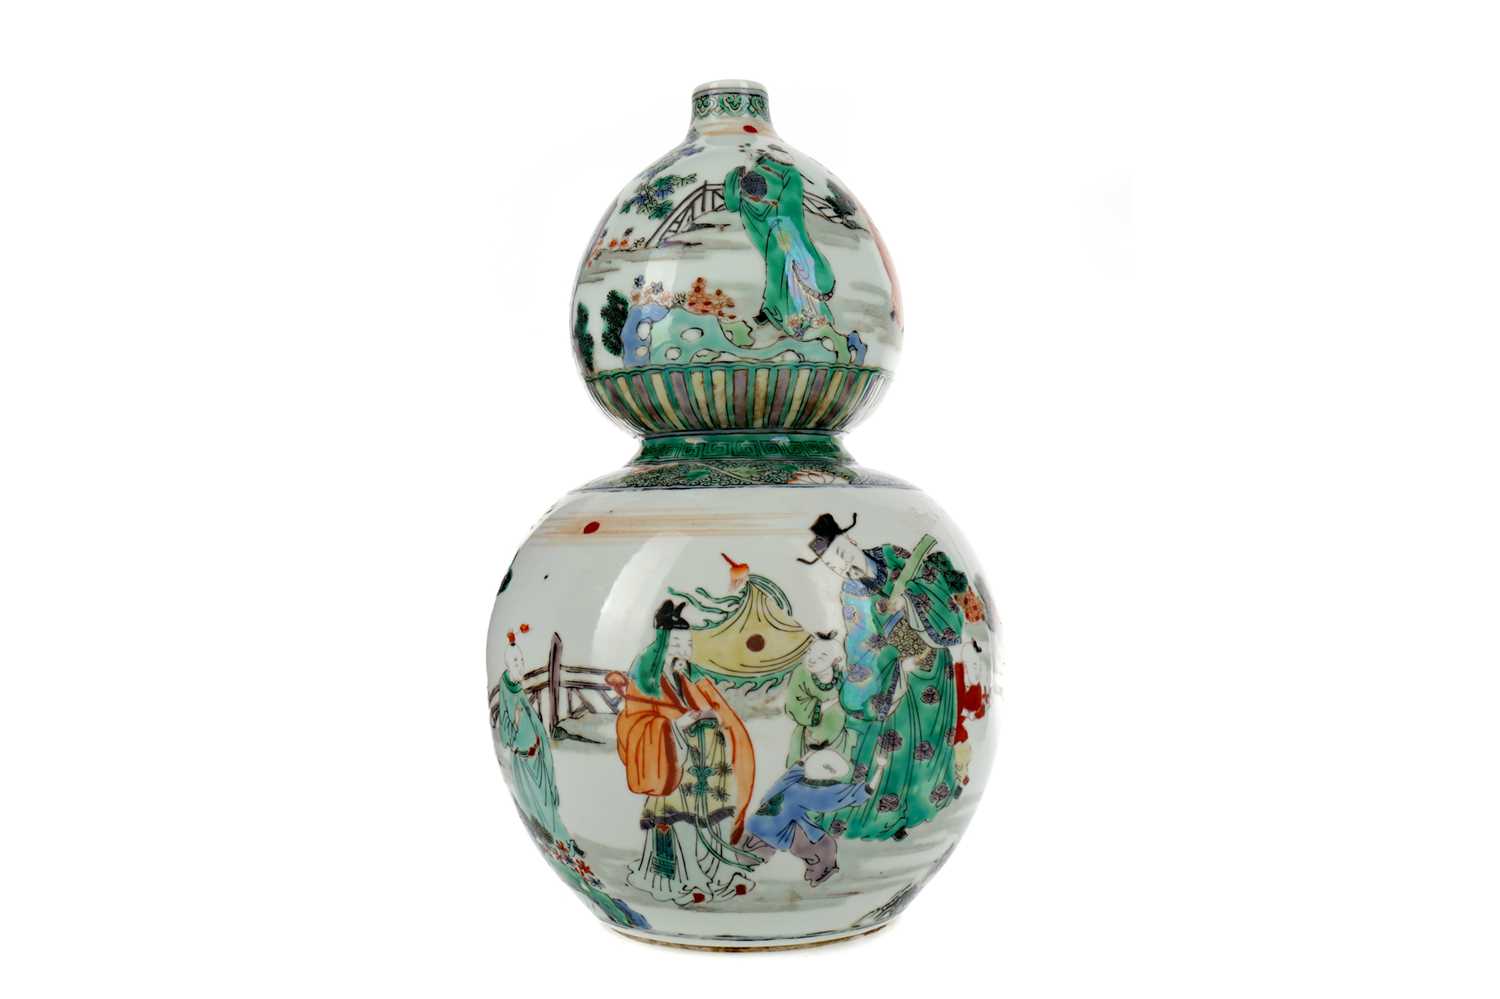 Lot 670 - A LATE 19TH CENTURY CHINESE DOUBLE GOURD VASE